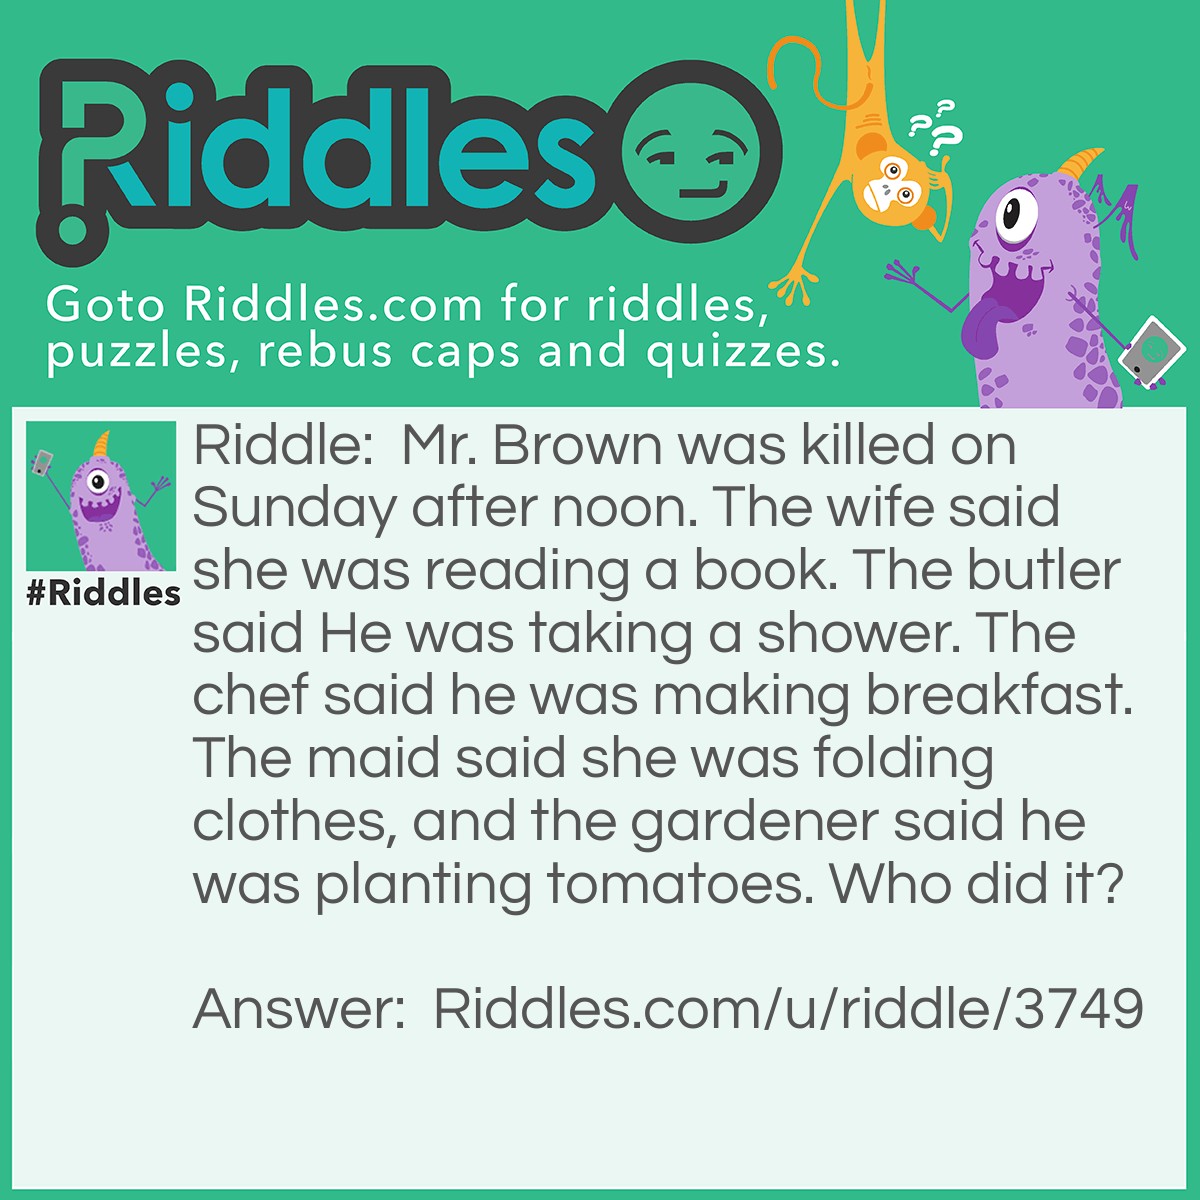 Riddle: Mr. Brown was killed on Sunday after noon. The wife said she was reading a book. The butler said He was taking a shower. The chef said he was making breakfast. The maid said she was folding clothes, and the gardener said he was planting tomatoes. Who did it? Answer: The chef killed Mr. Brown because he said he was cooking breakfast but it was a Sunday afternoon.